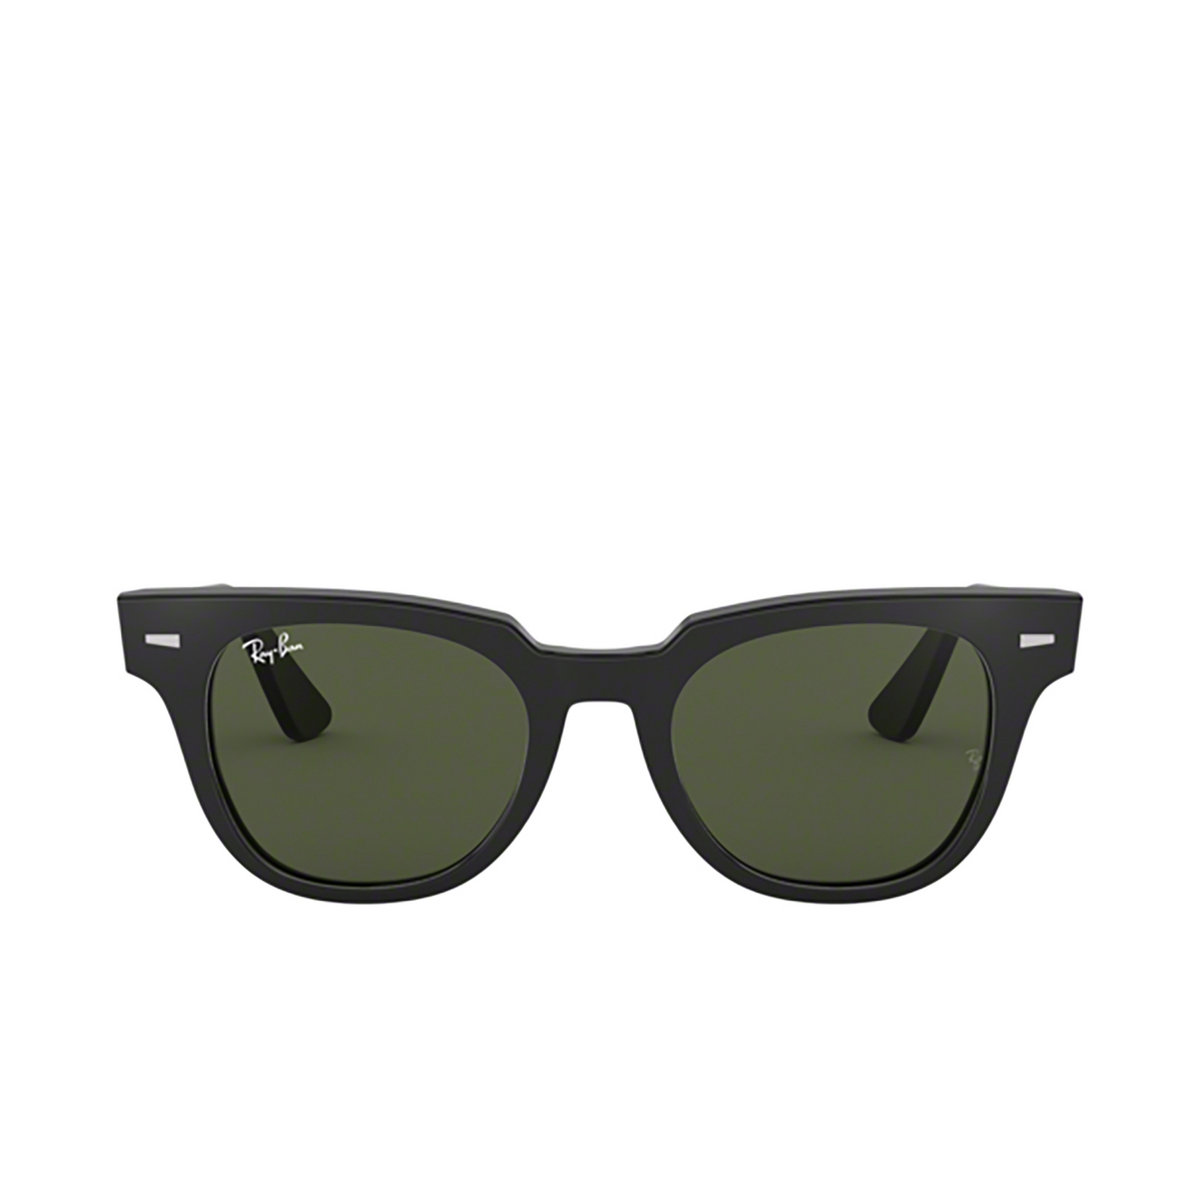 Ray-Ban METEOR Sunglasses 901/31 BLACK - front view